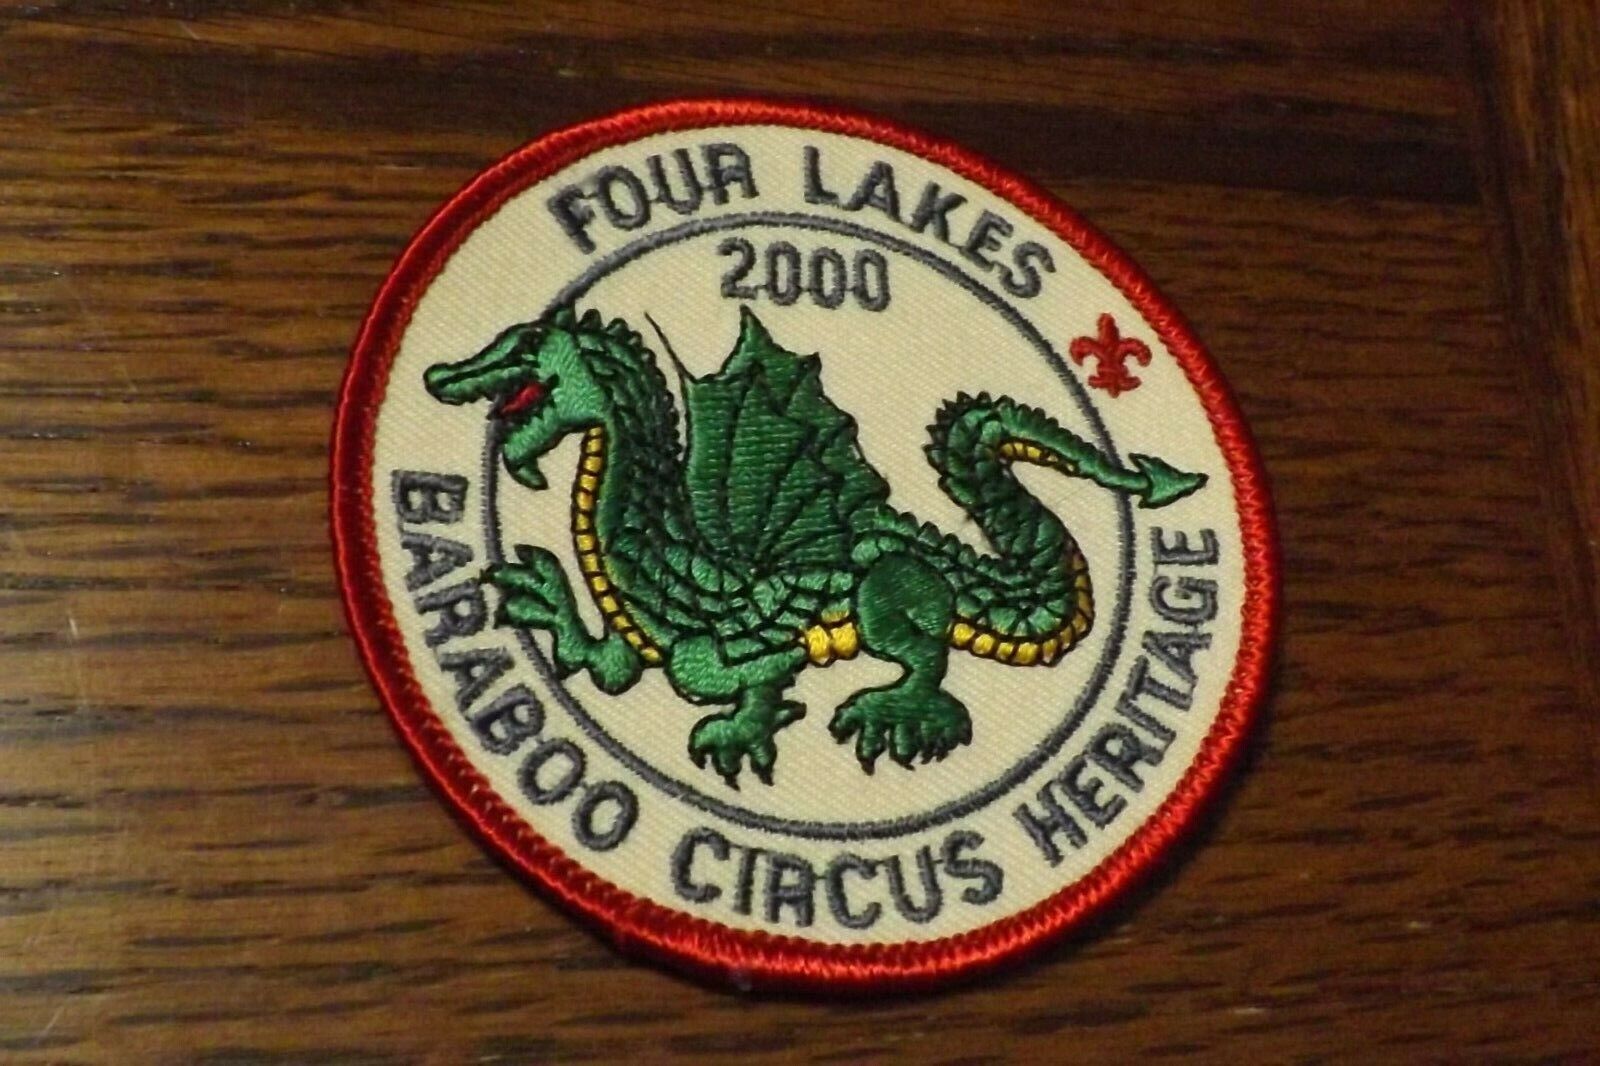 BOY SCOUT PATCH 2000 FOUR LAKES COUNCIL BARABOO CIRCUS HERITAGE